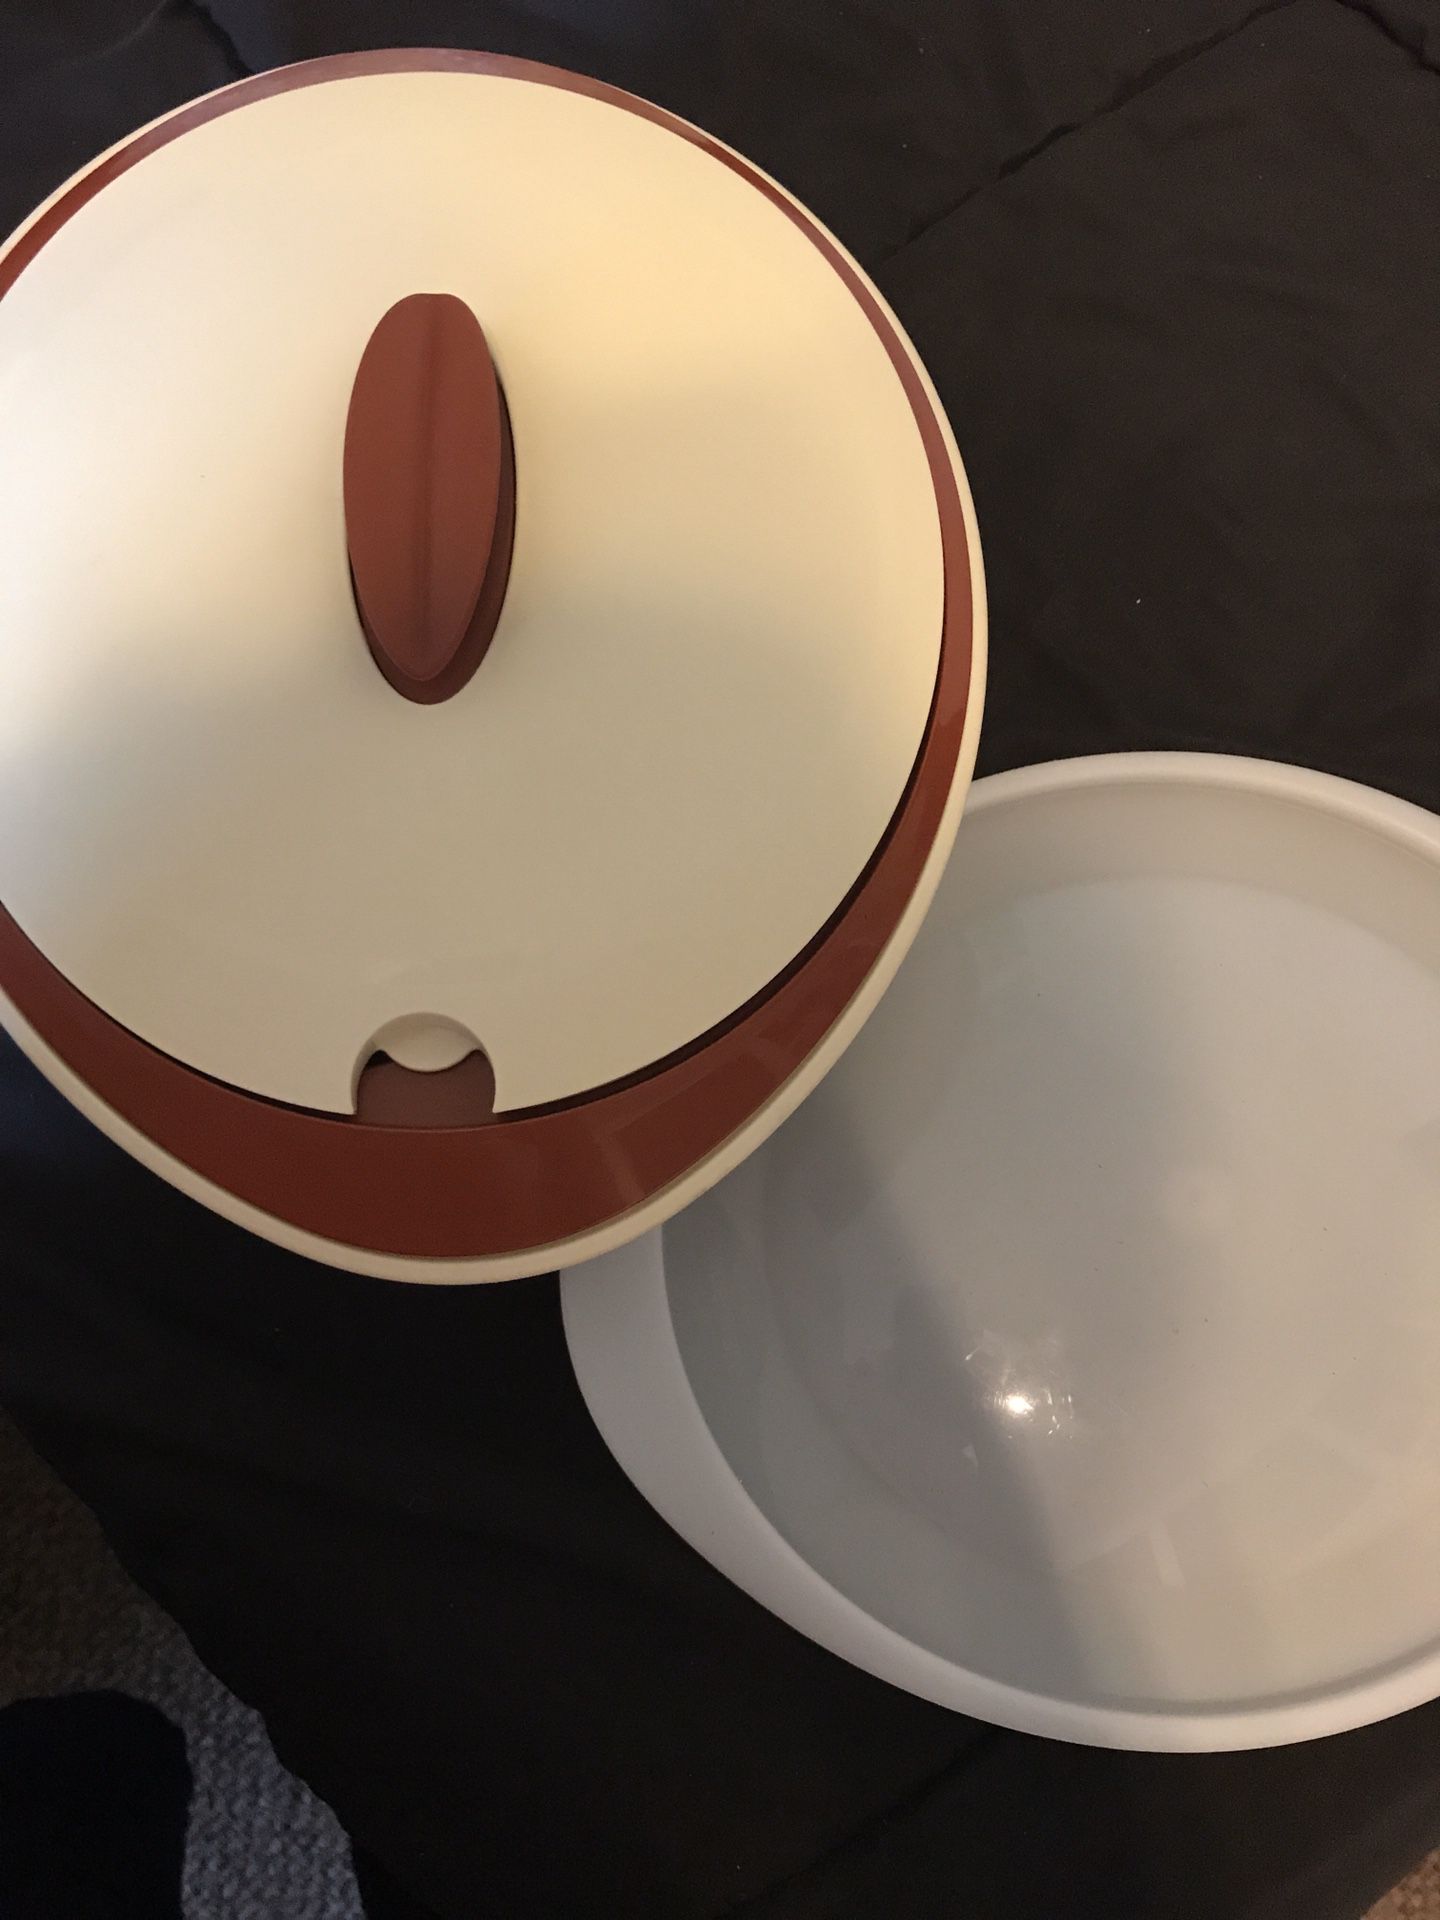 Tupperware cream and brown insulated bowl with lids